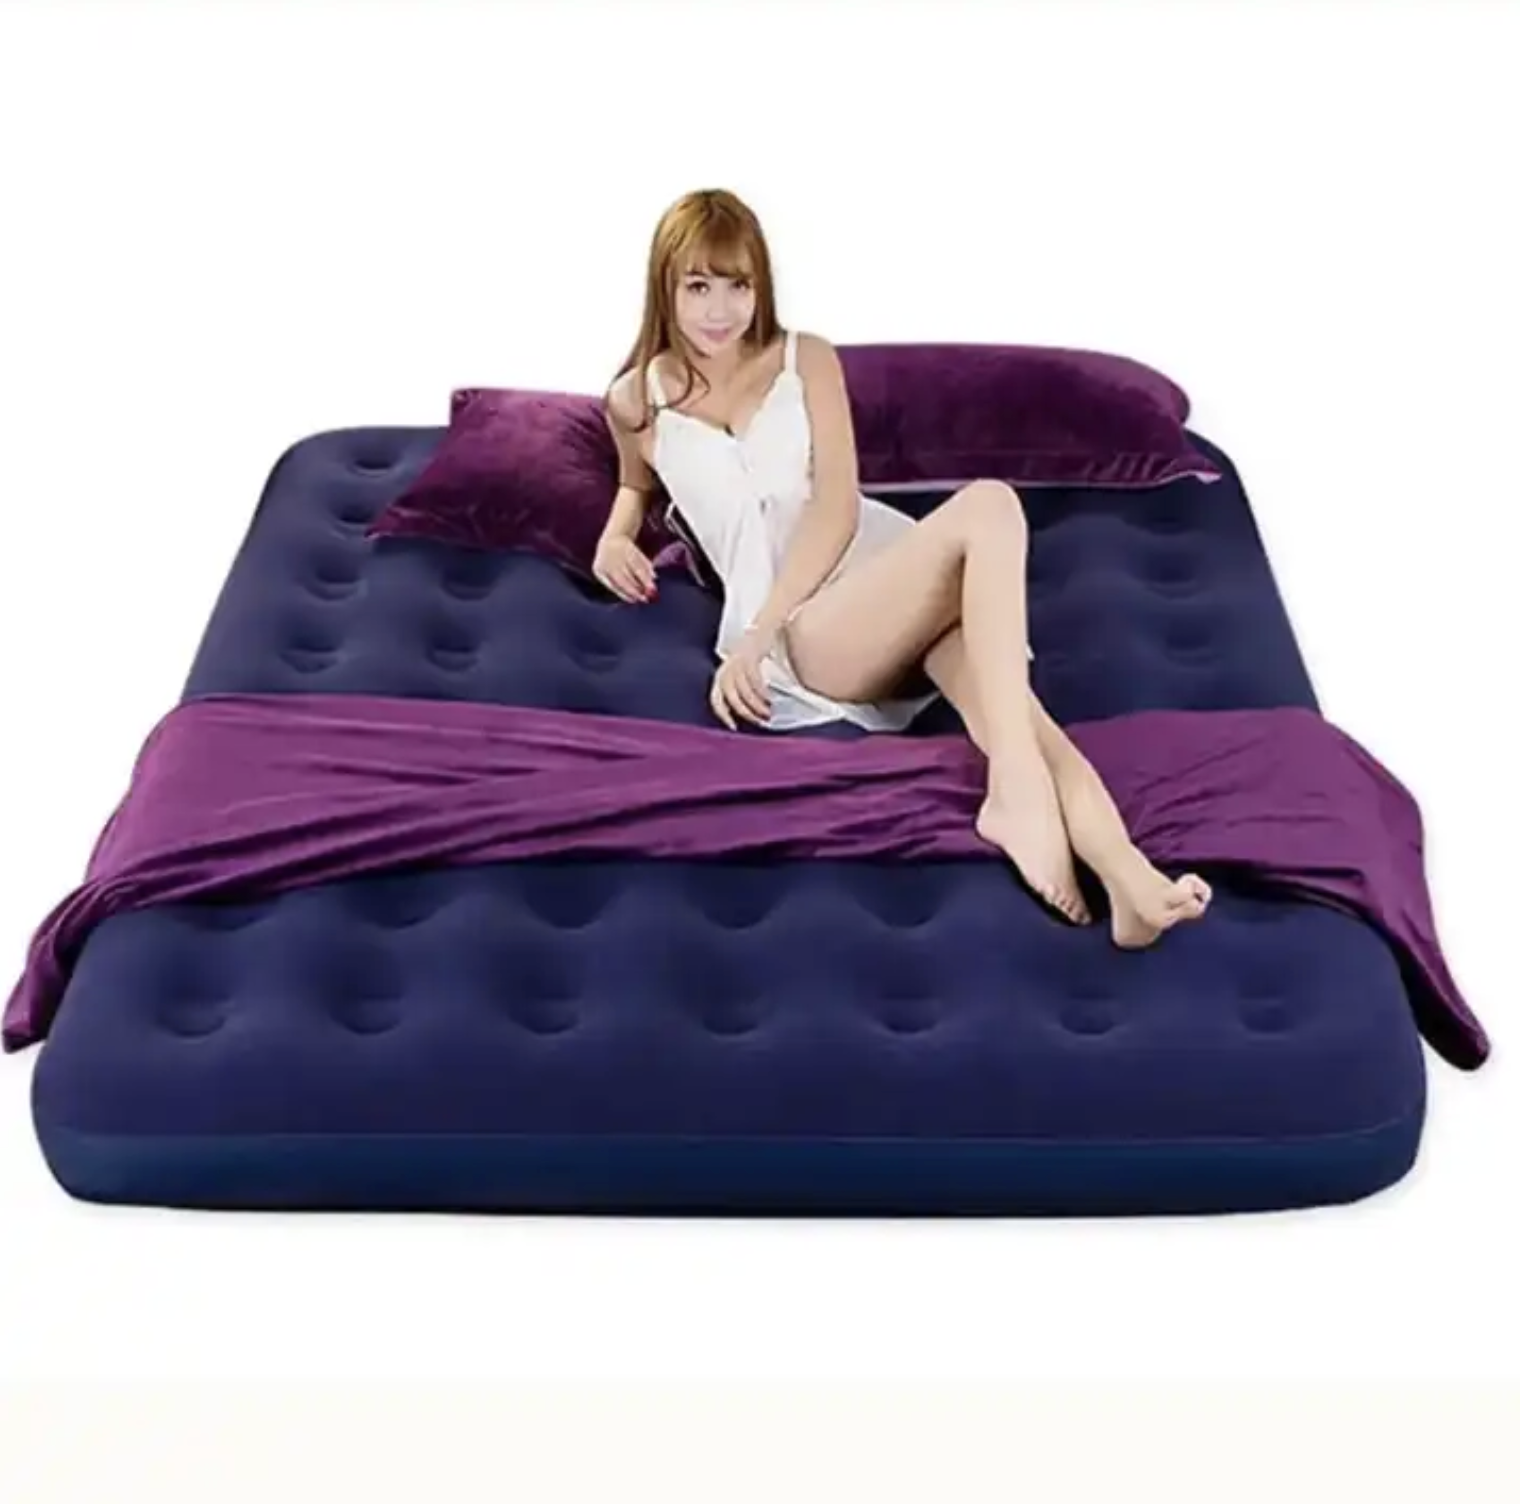 Air Mattress Bed With Built In Pump Double Bed Queen Size Airbed